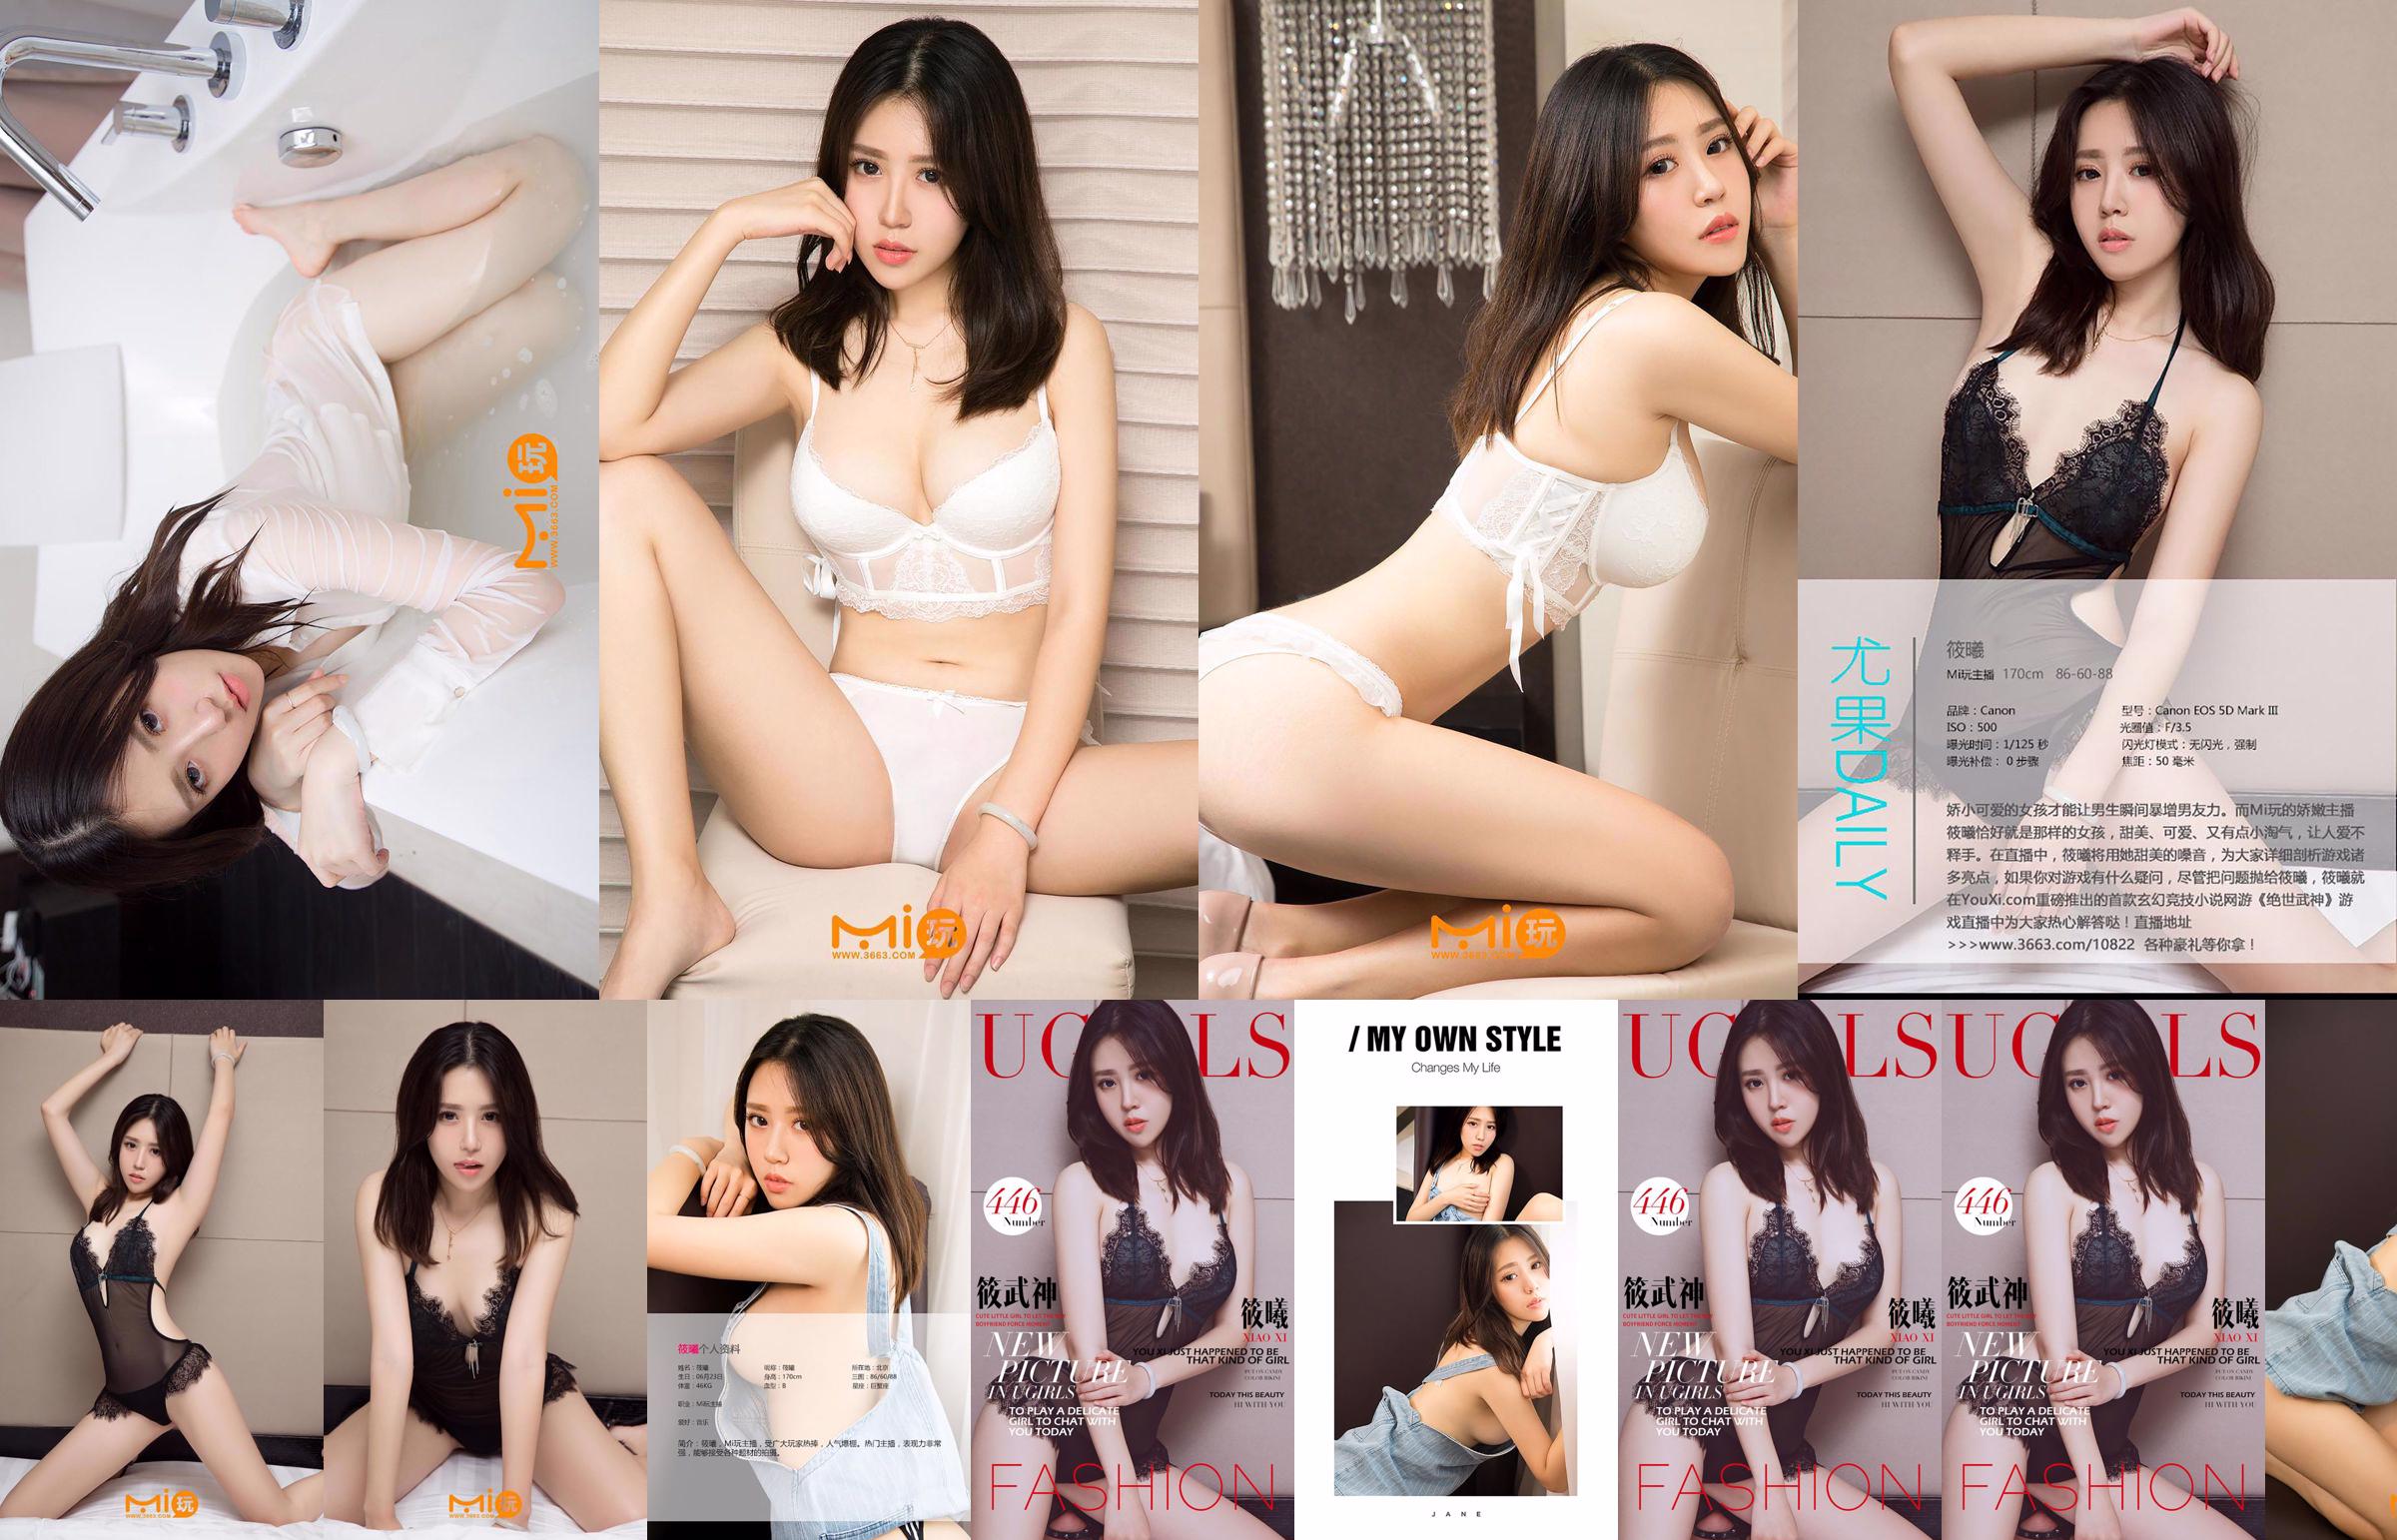 Xiao Xi «Xiao Wu Shen» [爱 优 物 Ugirls] N ° 446 No.905b89 Page 1